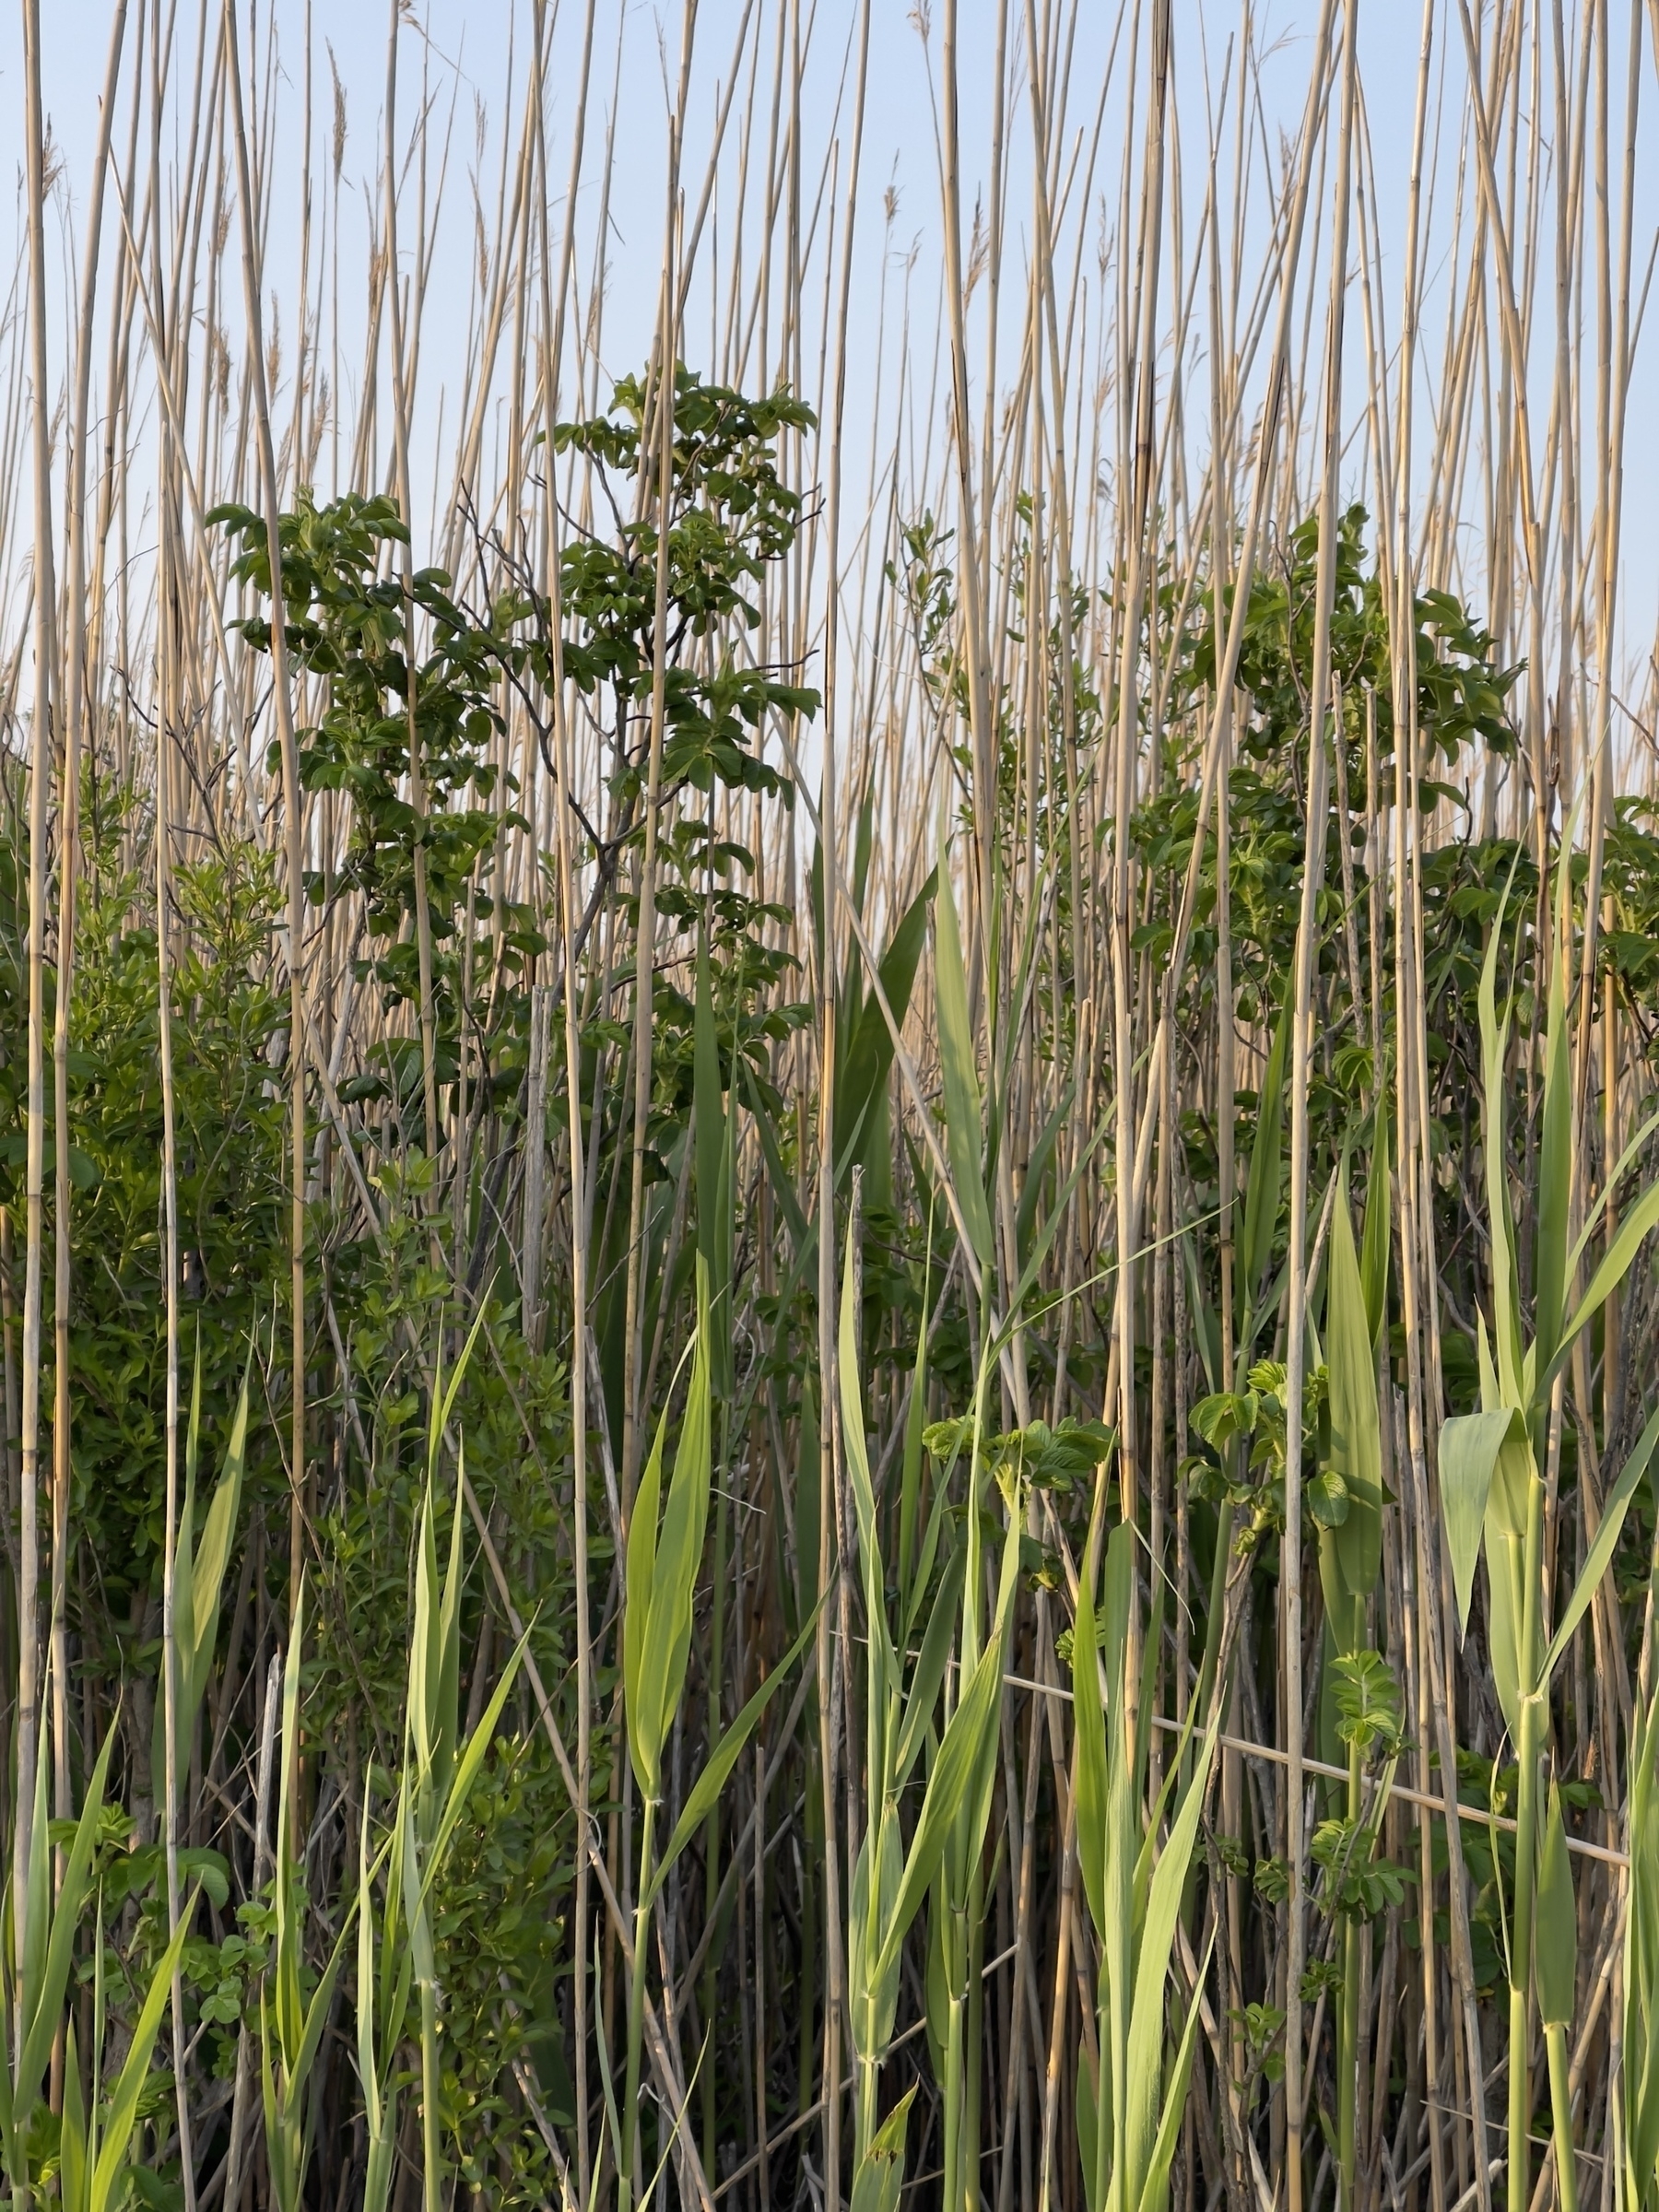 Beach reeds with shrubs mixed in.